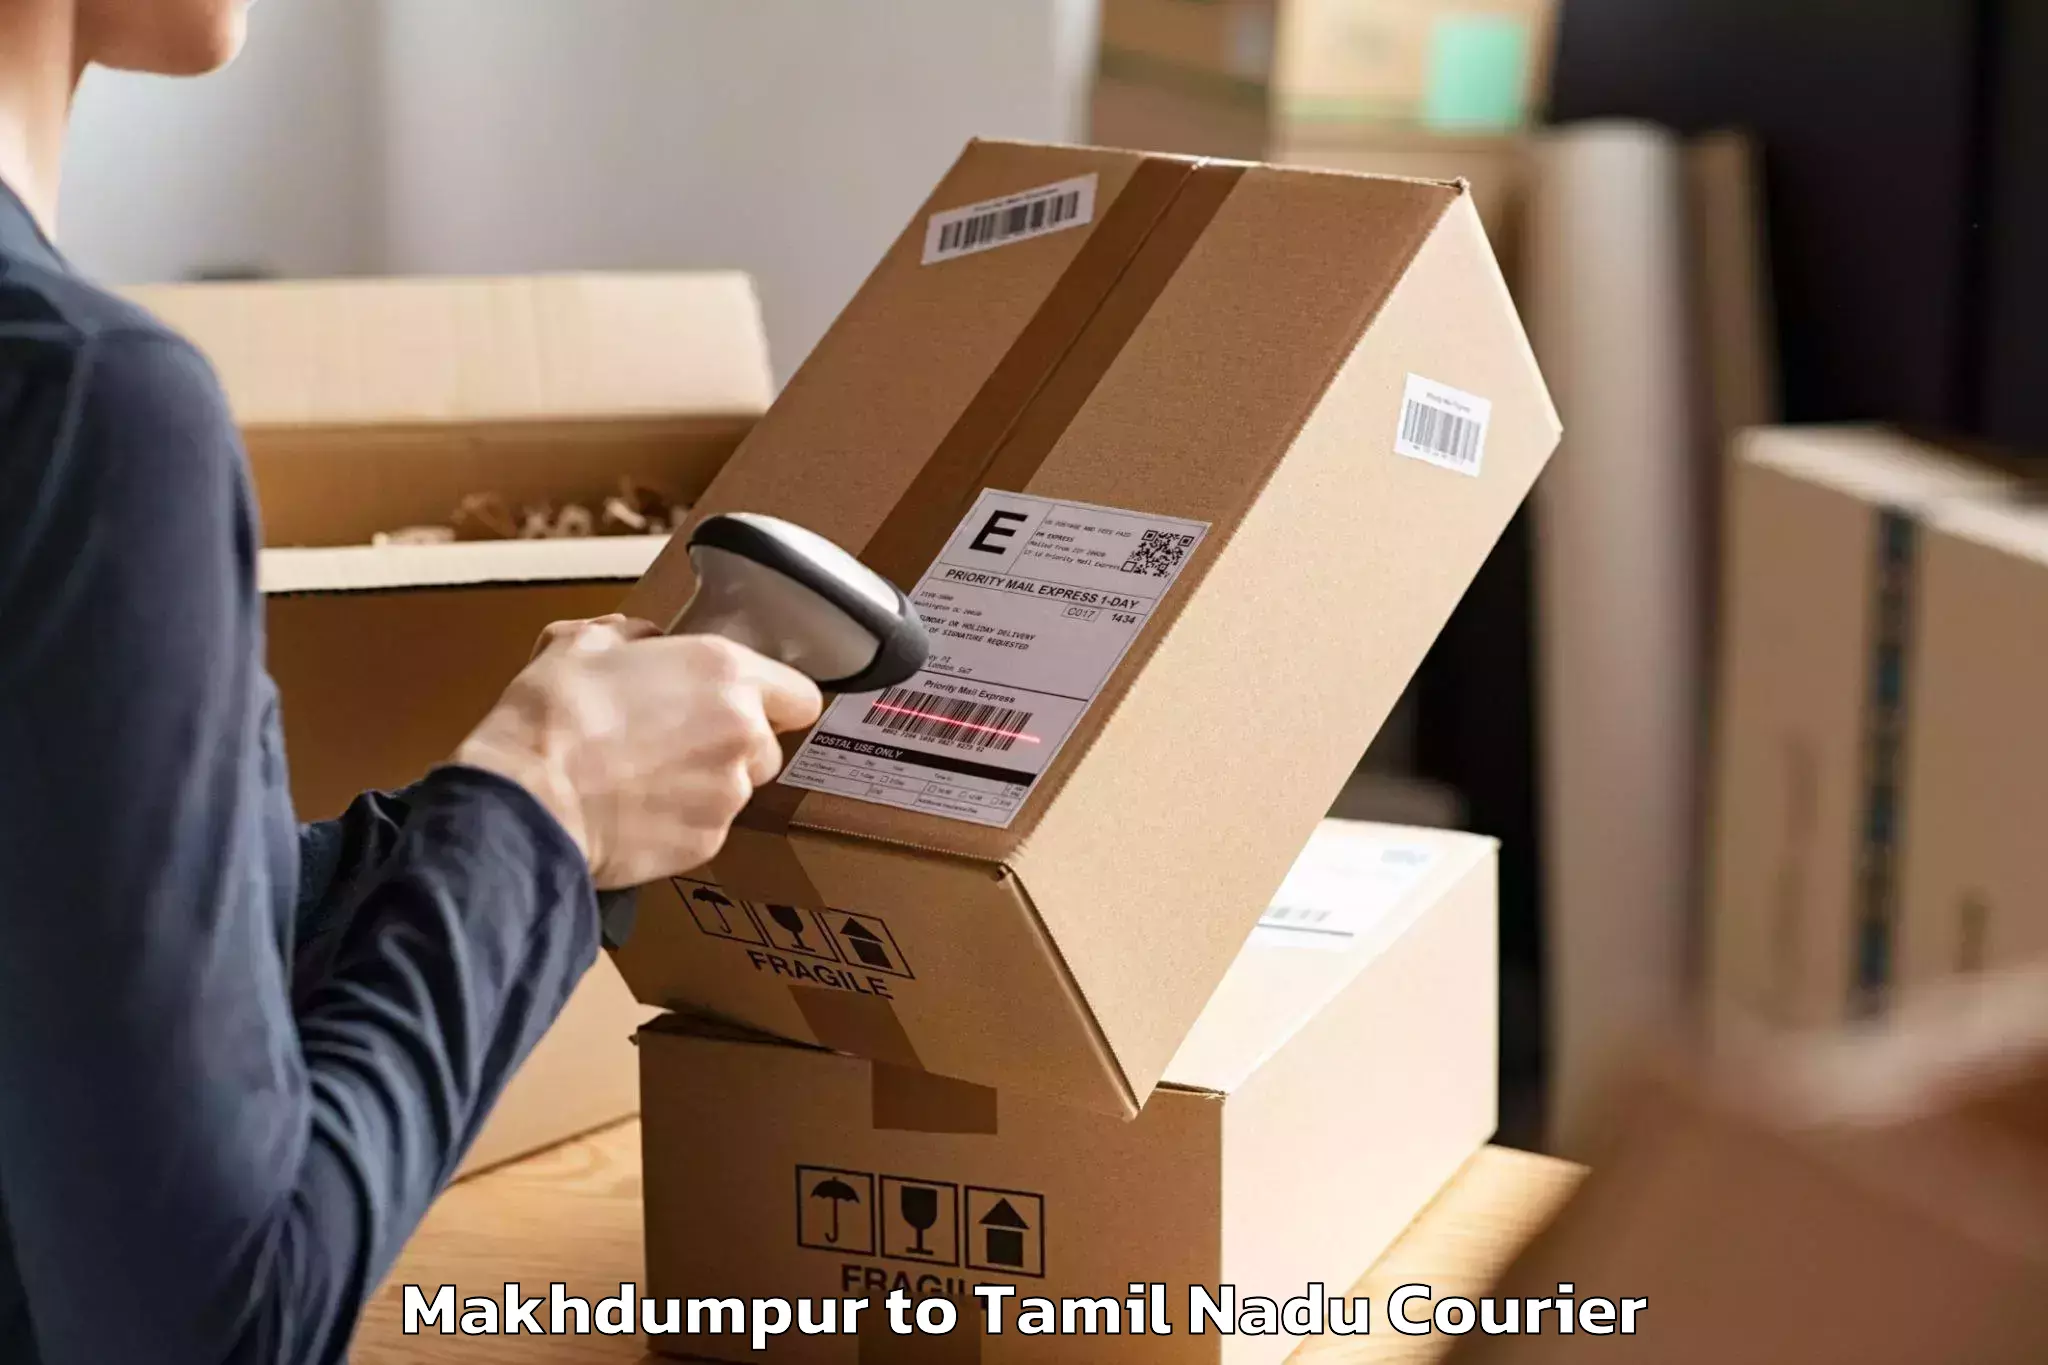 Furniture delivery service Makhdumpur to Bhavani